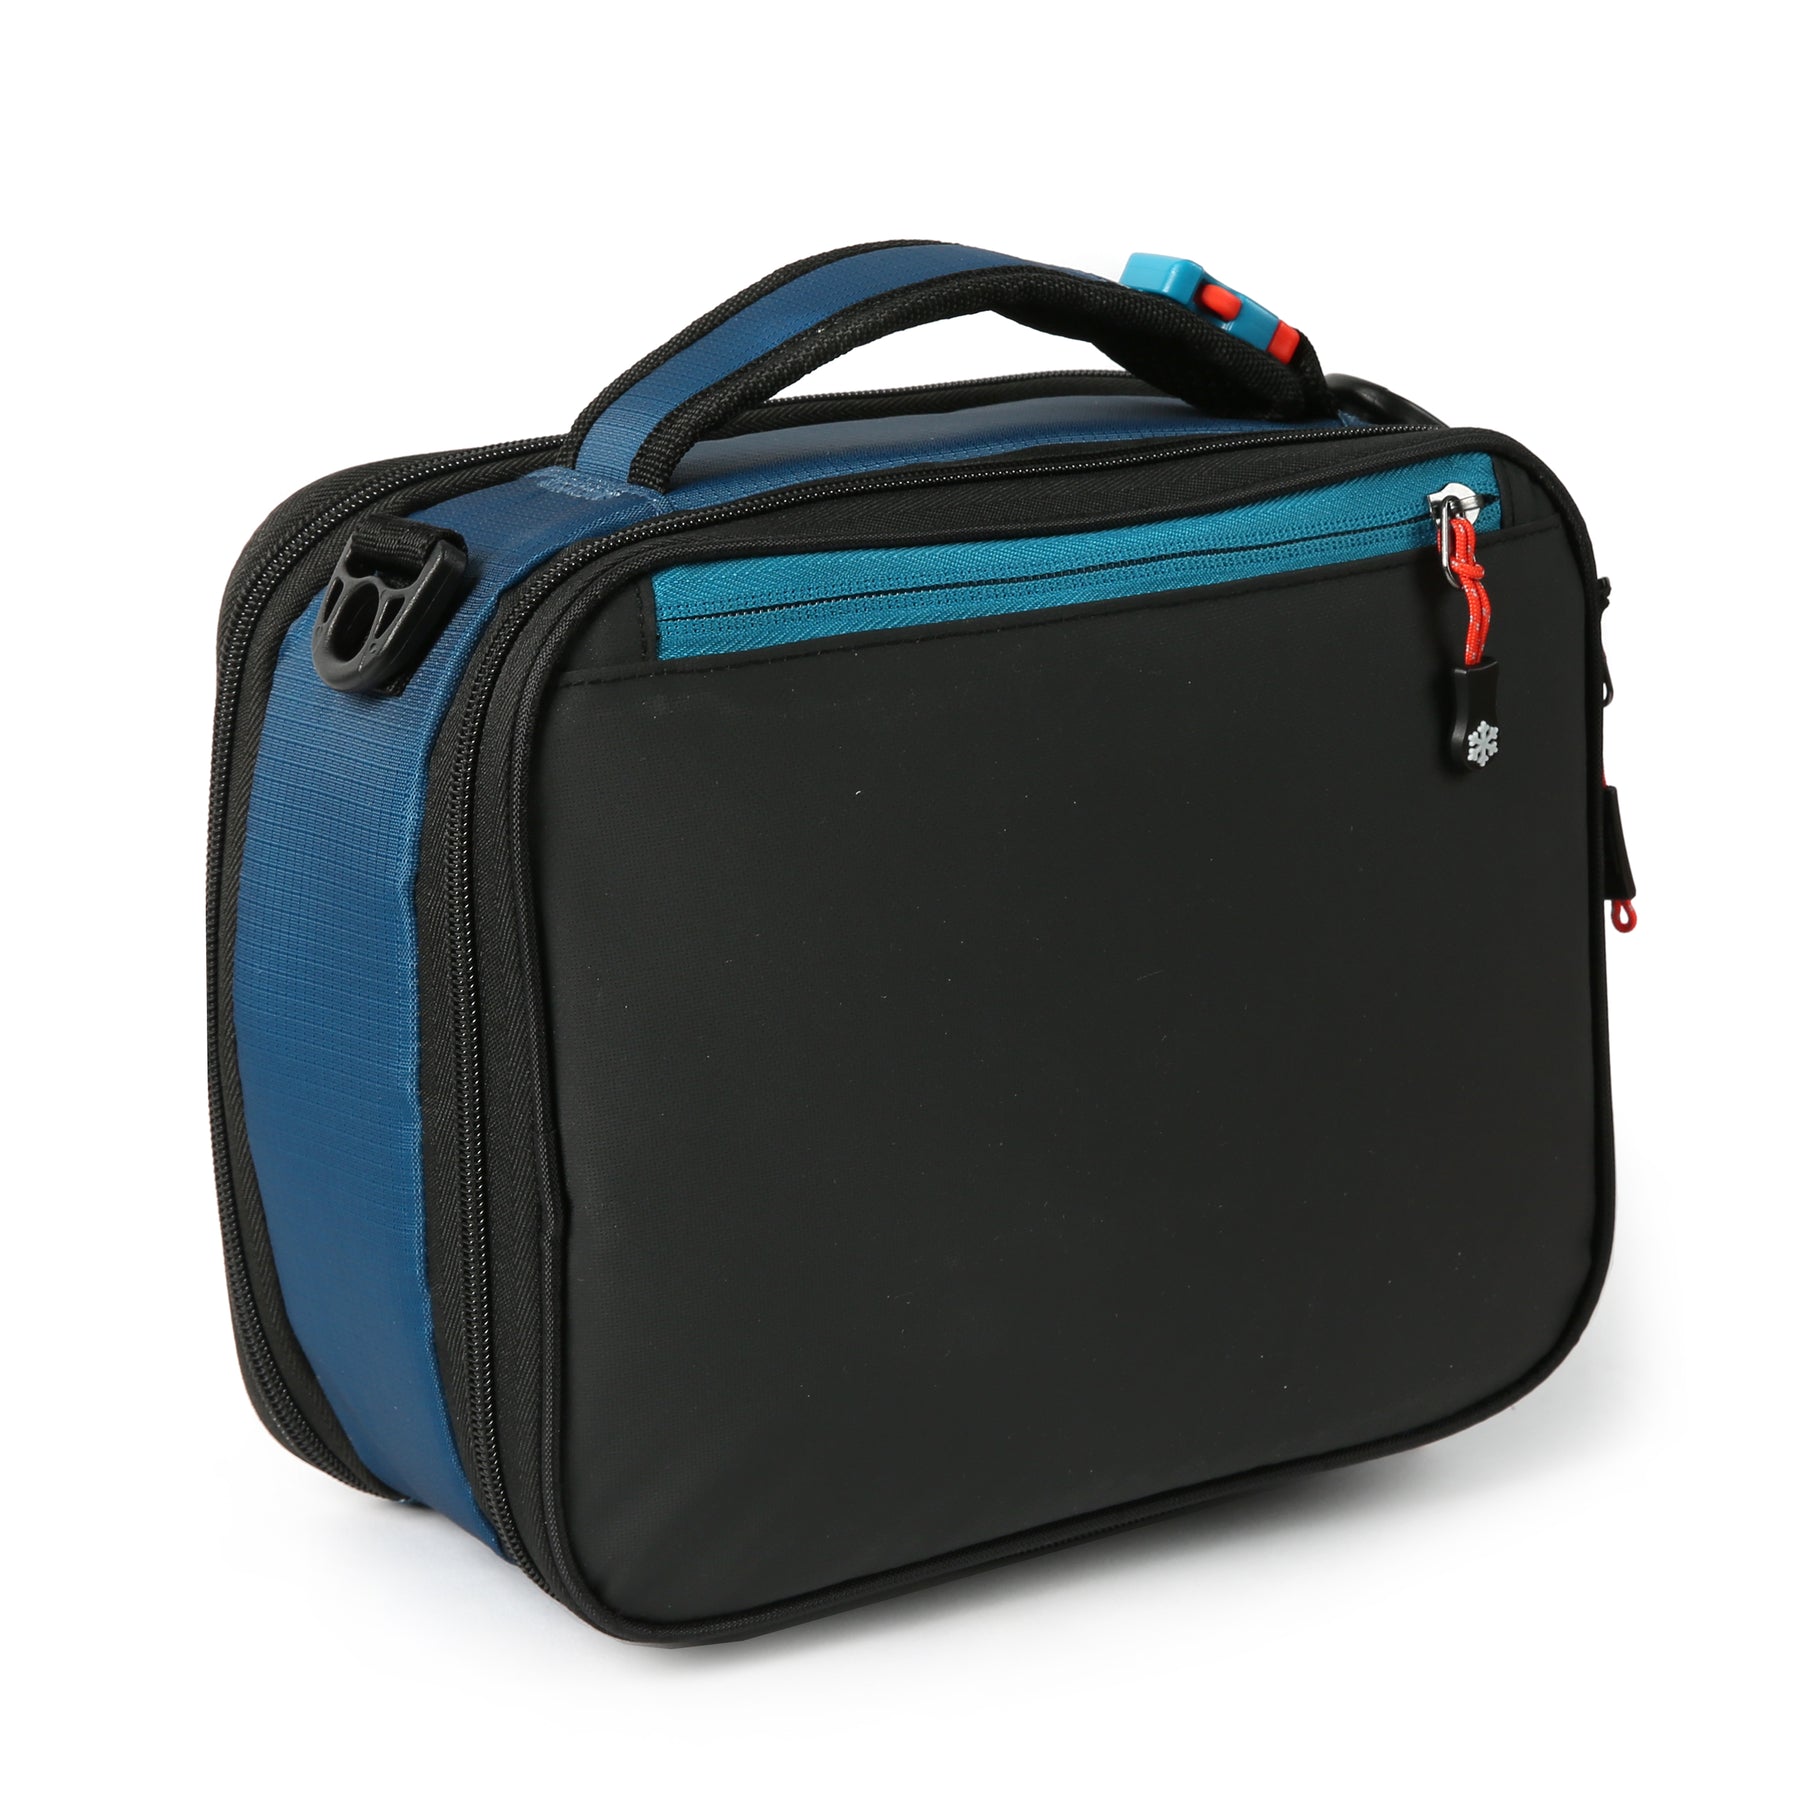 Titan by Arctic Zone™ Fridge Cold Expandable Lunch Box | Arctic Zone